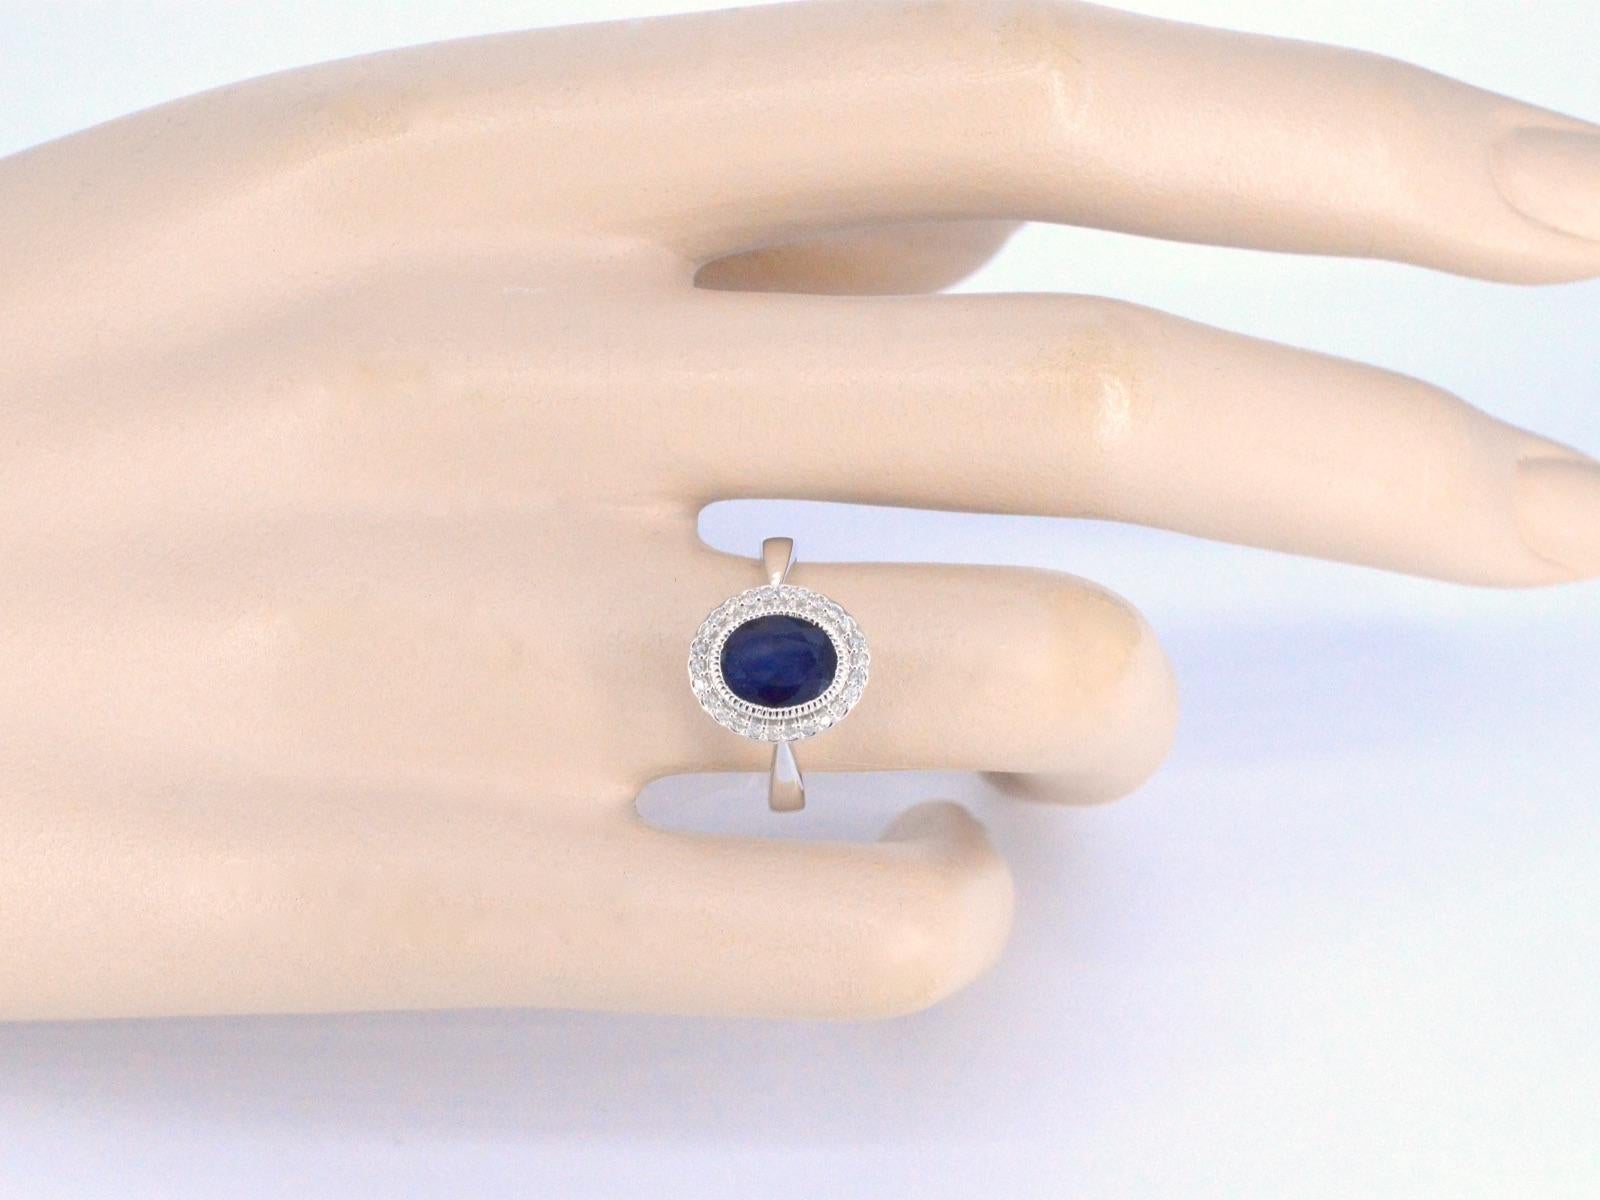 Brilliant Cut White Gold Entourage Ring with Diamonds and Sapphire